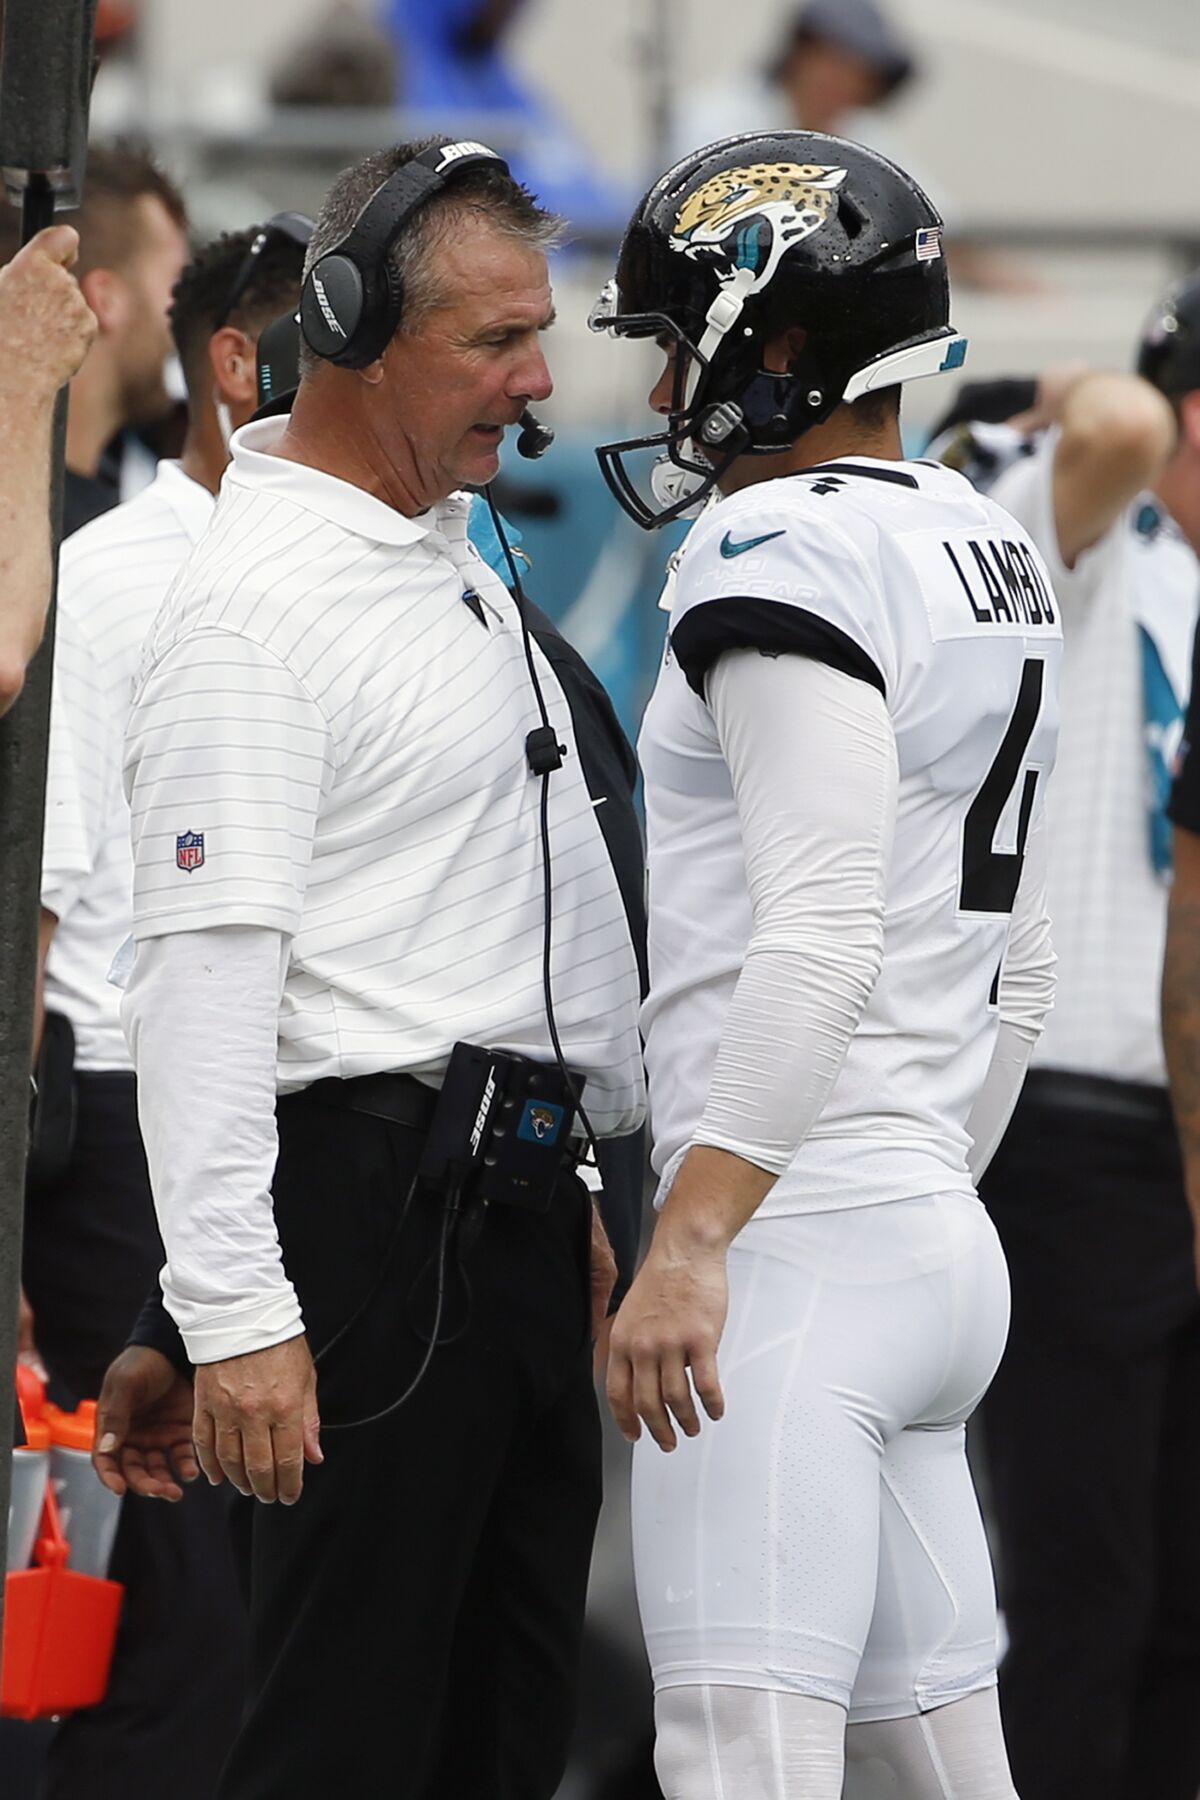 FILE - Jacksonville Jaguars head coach Urban Meyer, left, talks with place kicker Josh Lambo after Lambo missed his second field goal against the Denver Broncos during the first half of an NFL football game, Sunday, Sept. 19, 2021, in Jacksonville, Fla. Former NFL place-kicker Josh Lambo has filed a lawsuit Tuesday, May 10, 2022 against the Jacksonville Jaguars seeking more than $3.5 million in salary and damages for emotional distress caused by former head coach Urban Meyer. (AP Photo/Stephen B. Morton, File)